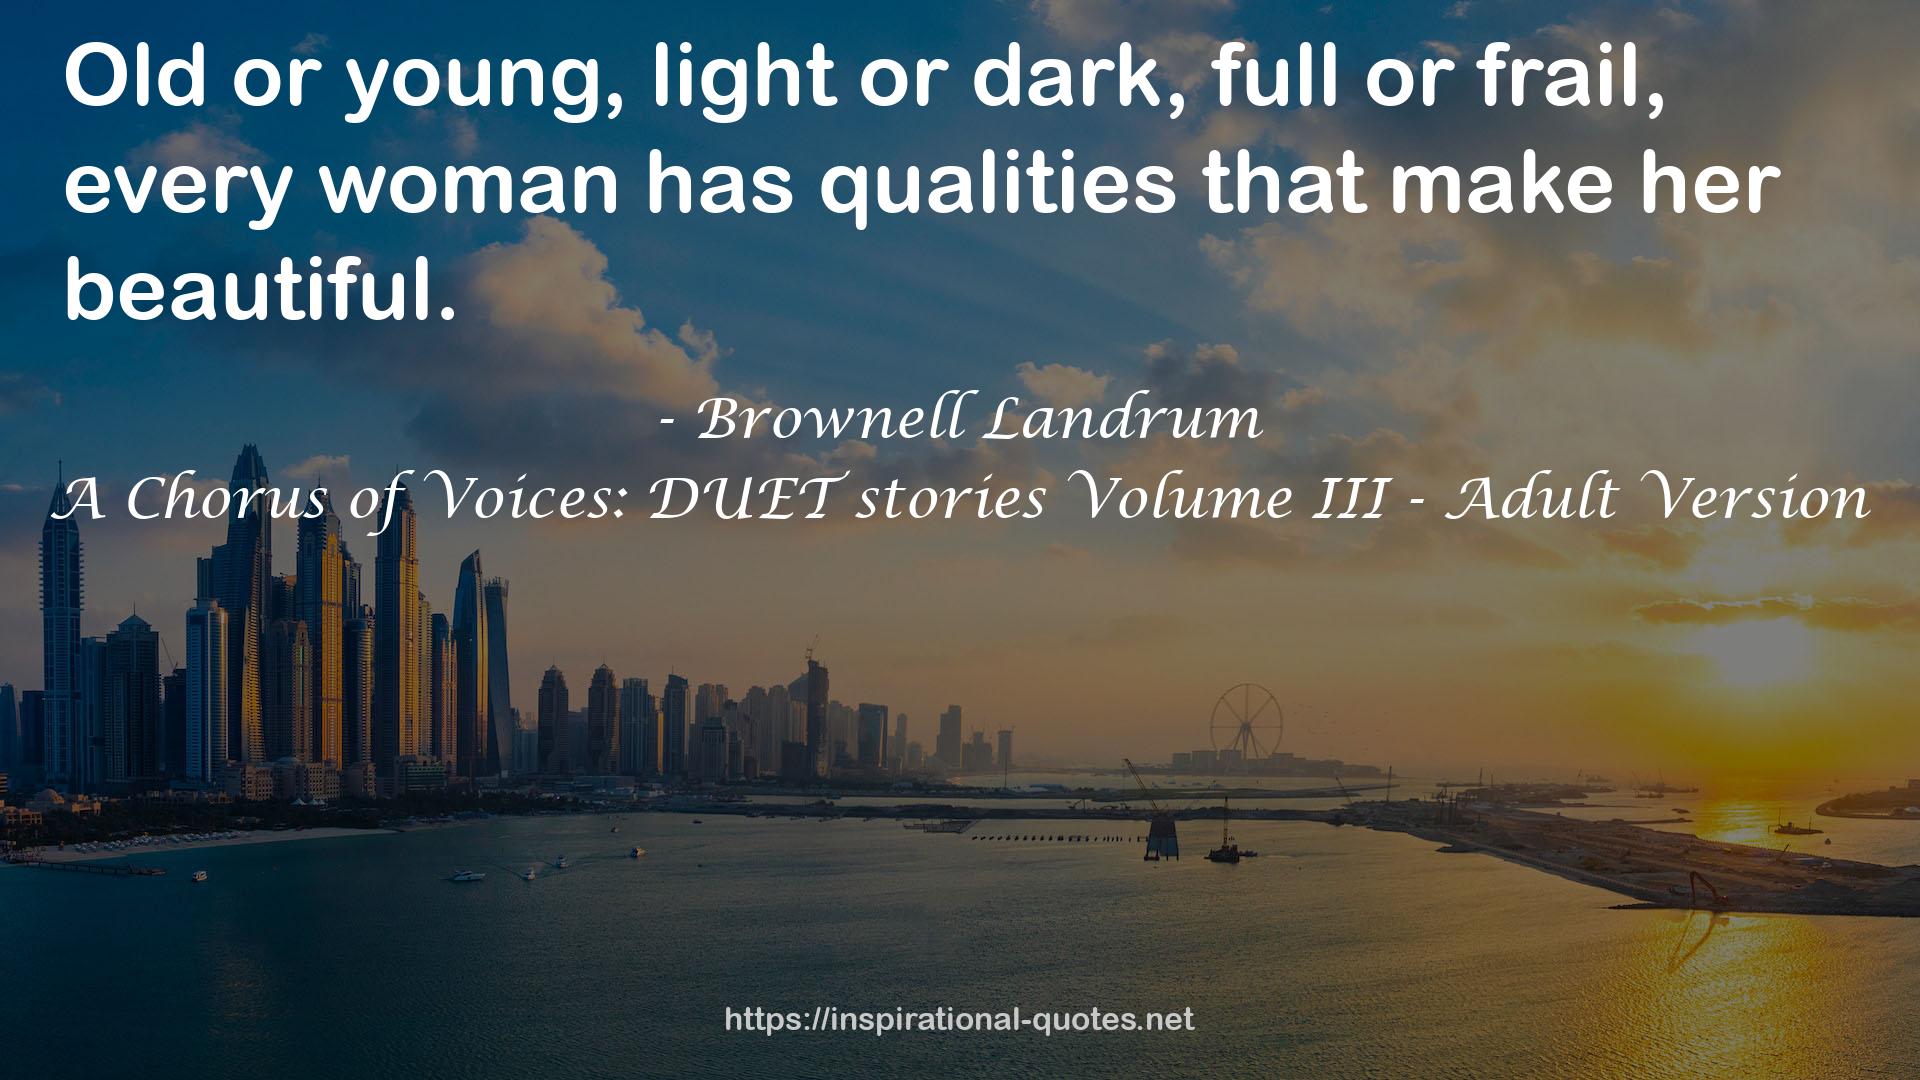 A Chorus of Voices: DUET stories Volume III - Adult Version QUOTES